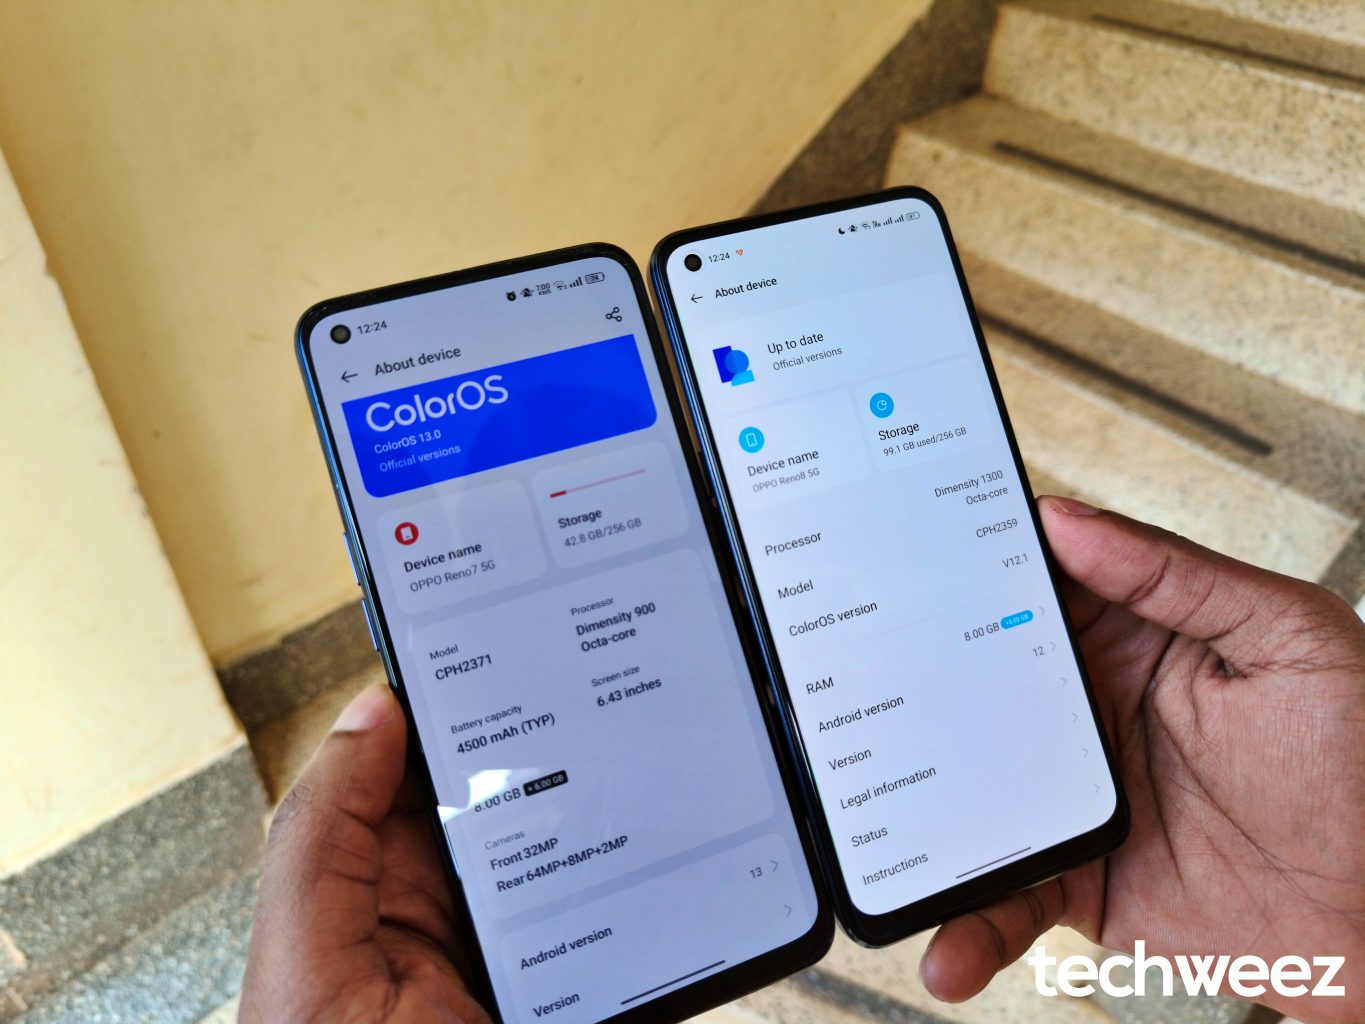 OPPO Reno7 5G with ColorOS 13(left) and OPPO Reno8 5G with ColorOS 12(right) that has now gotten Android 13